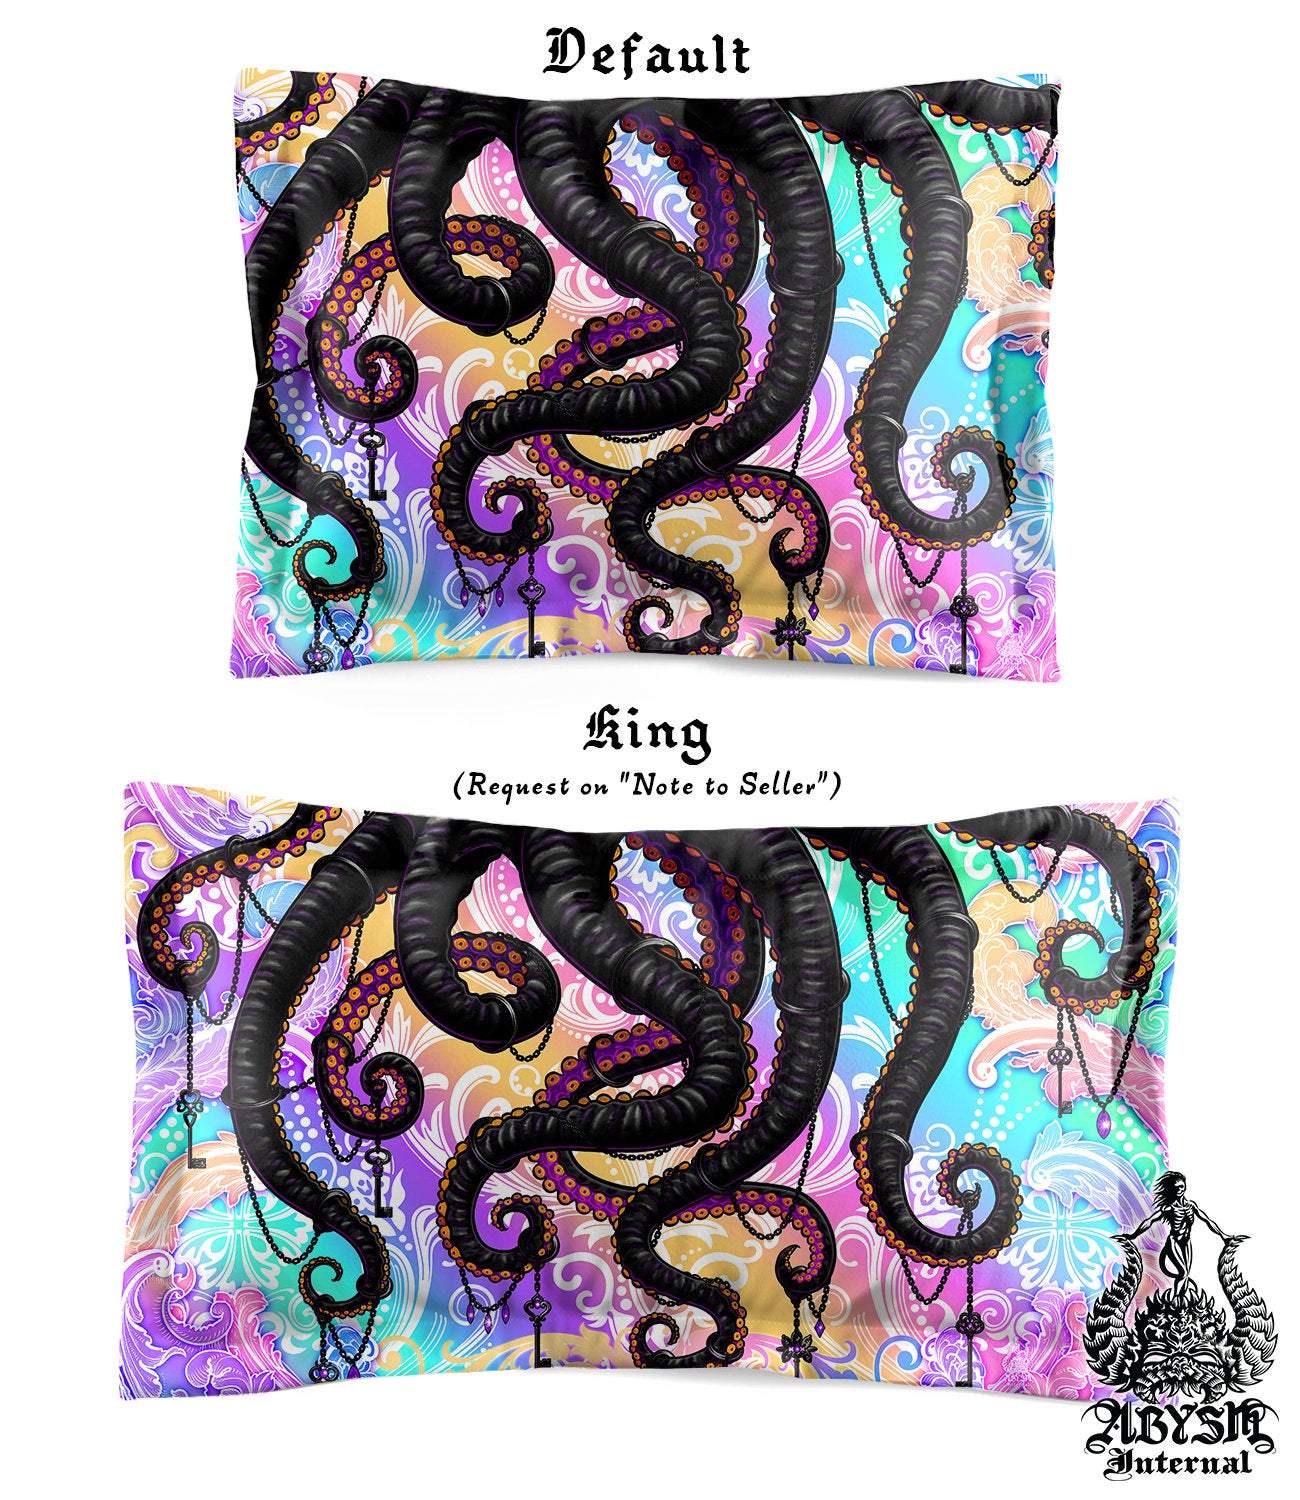 Aesthetic Bedding Set, Comforter and Duvet, Indie Bed Cover, Kawaii Gamer Bedroom Decor, King, Queen and Twin Size - Black and Pastel Punk Octopus - Abysm Internal